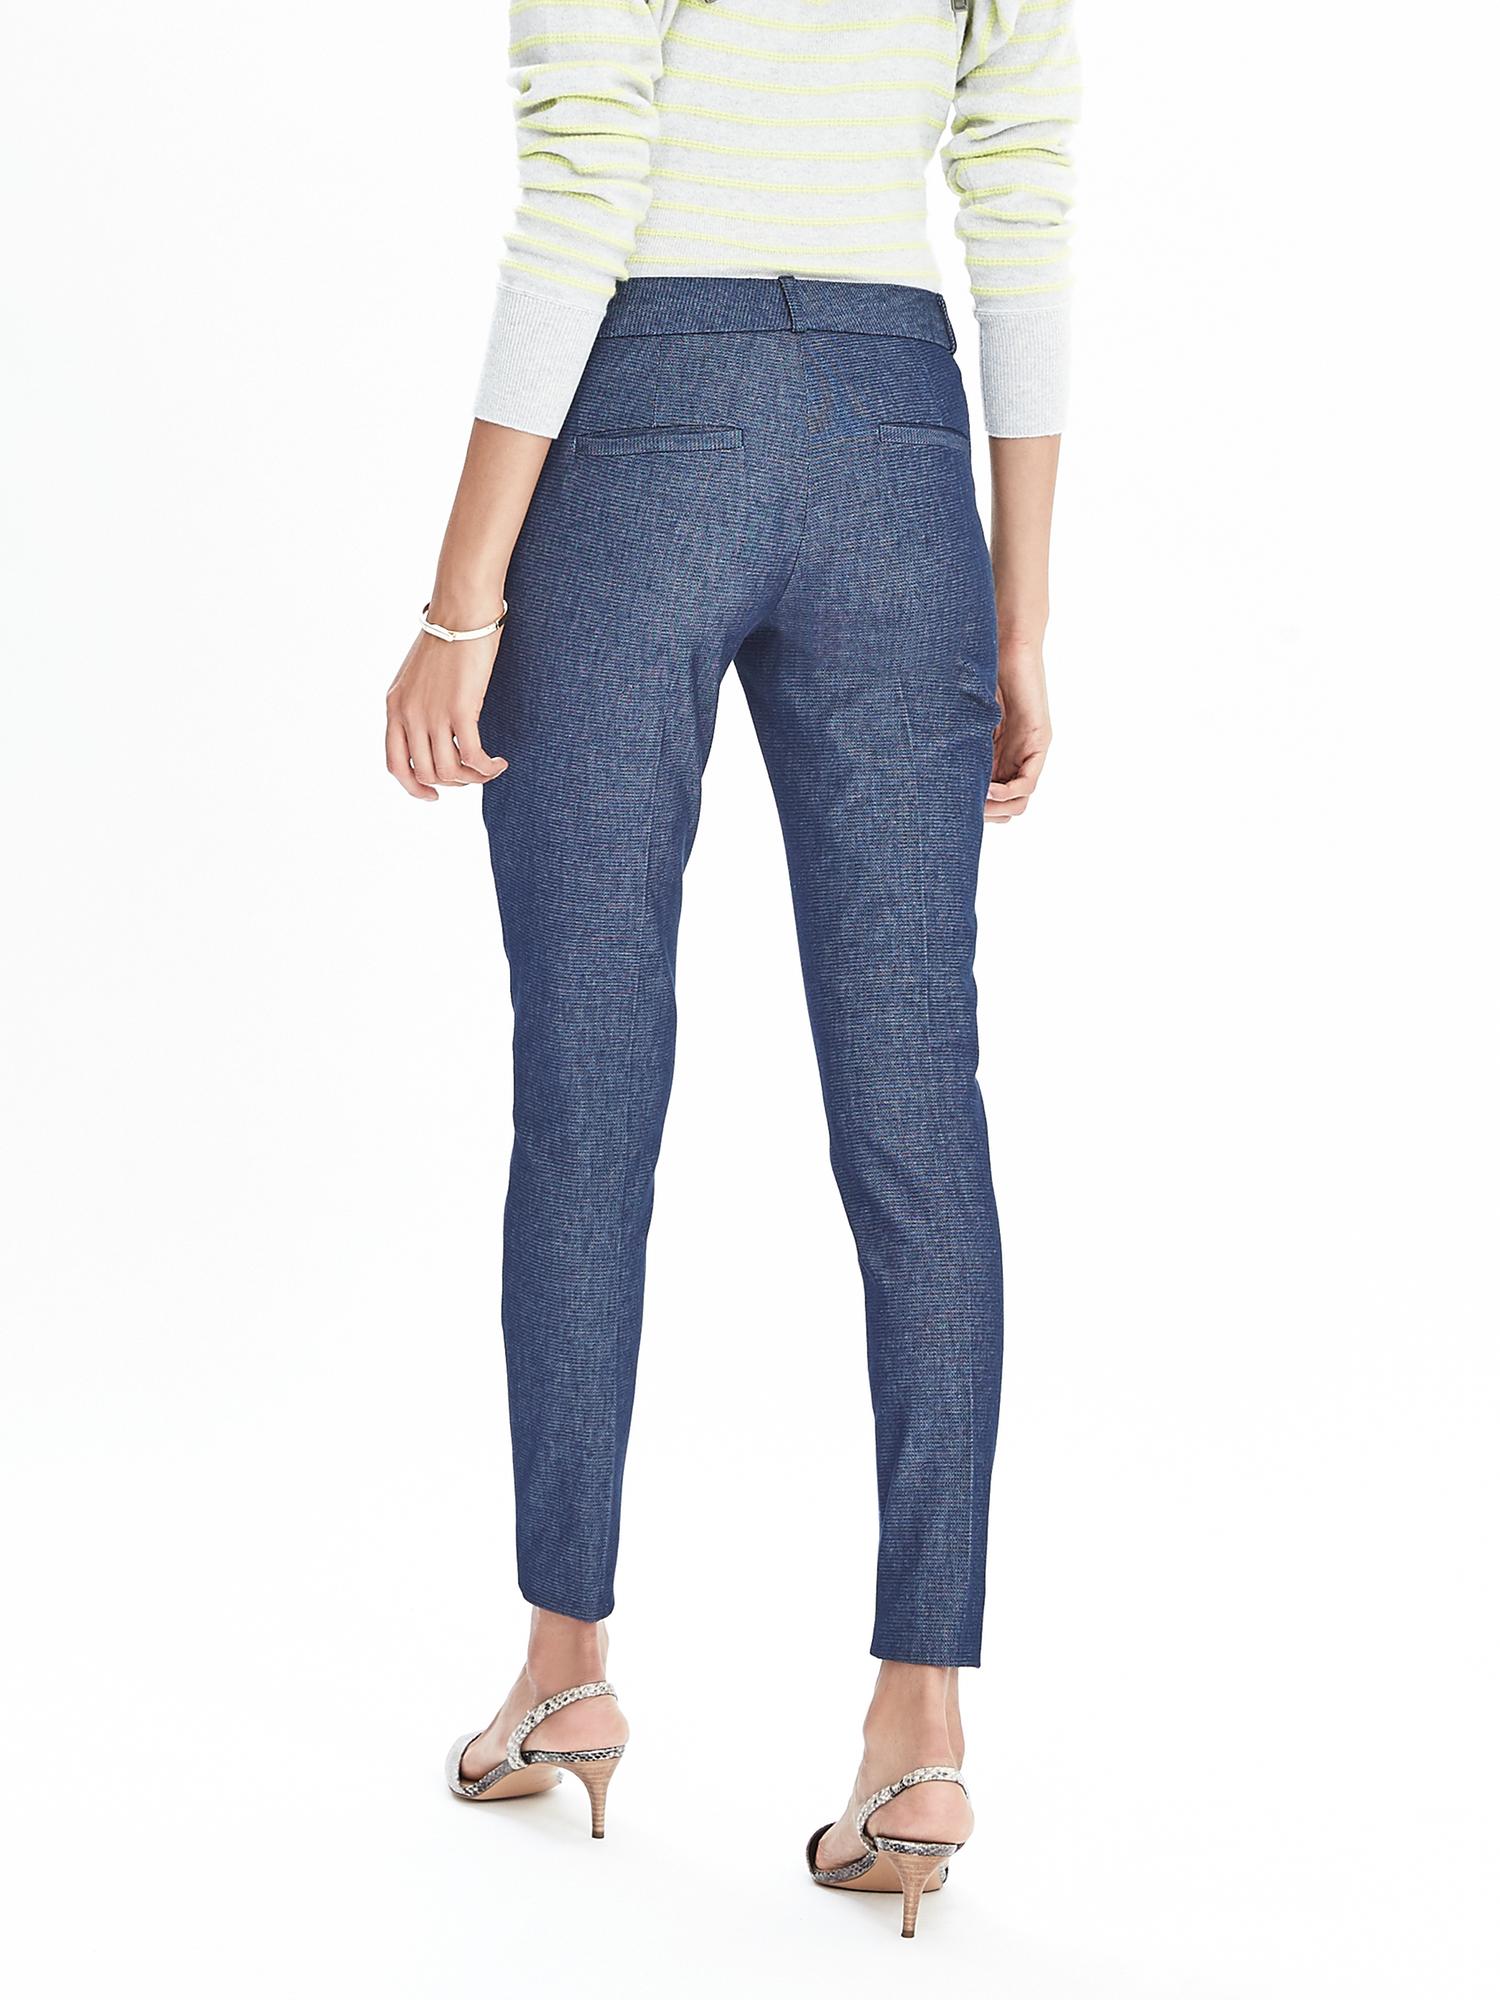 New Sloan-Fit Chambray Slim Ankle Pant